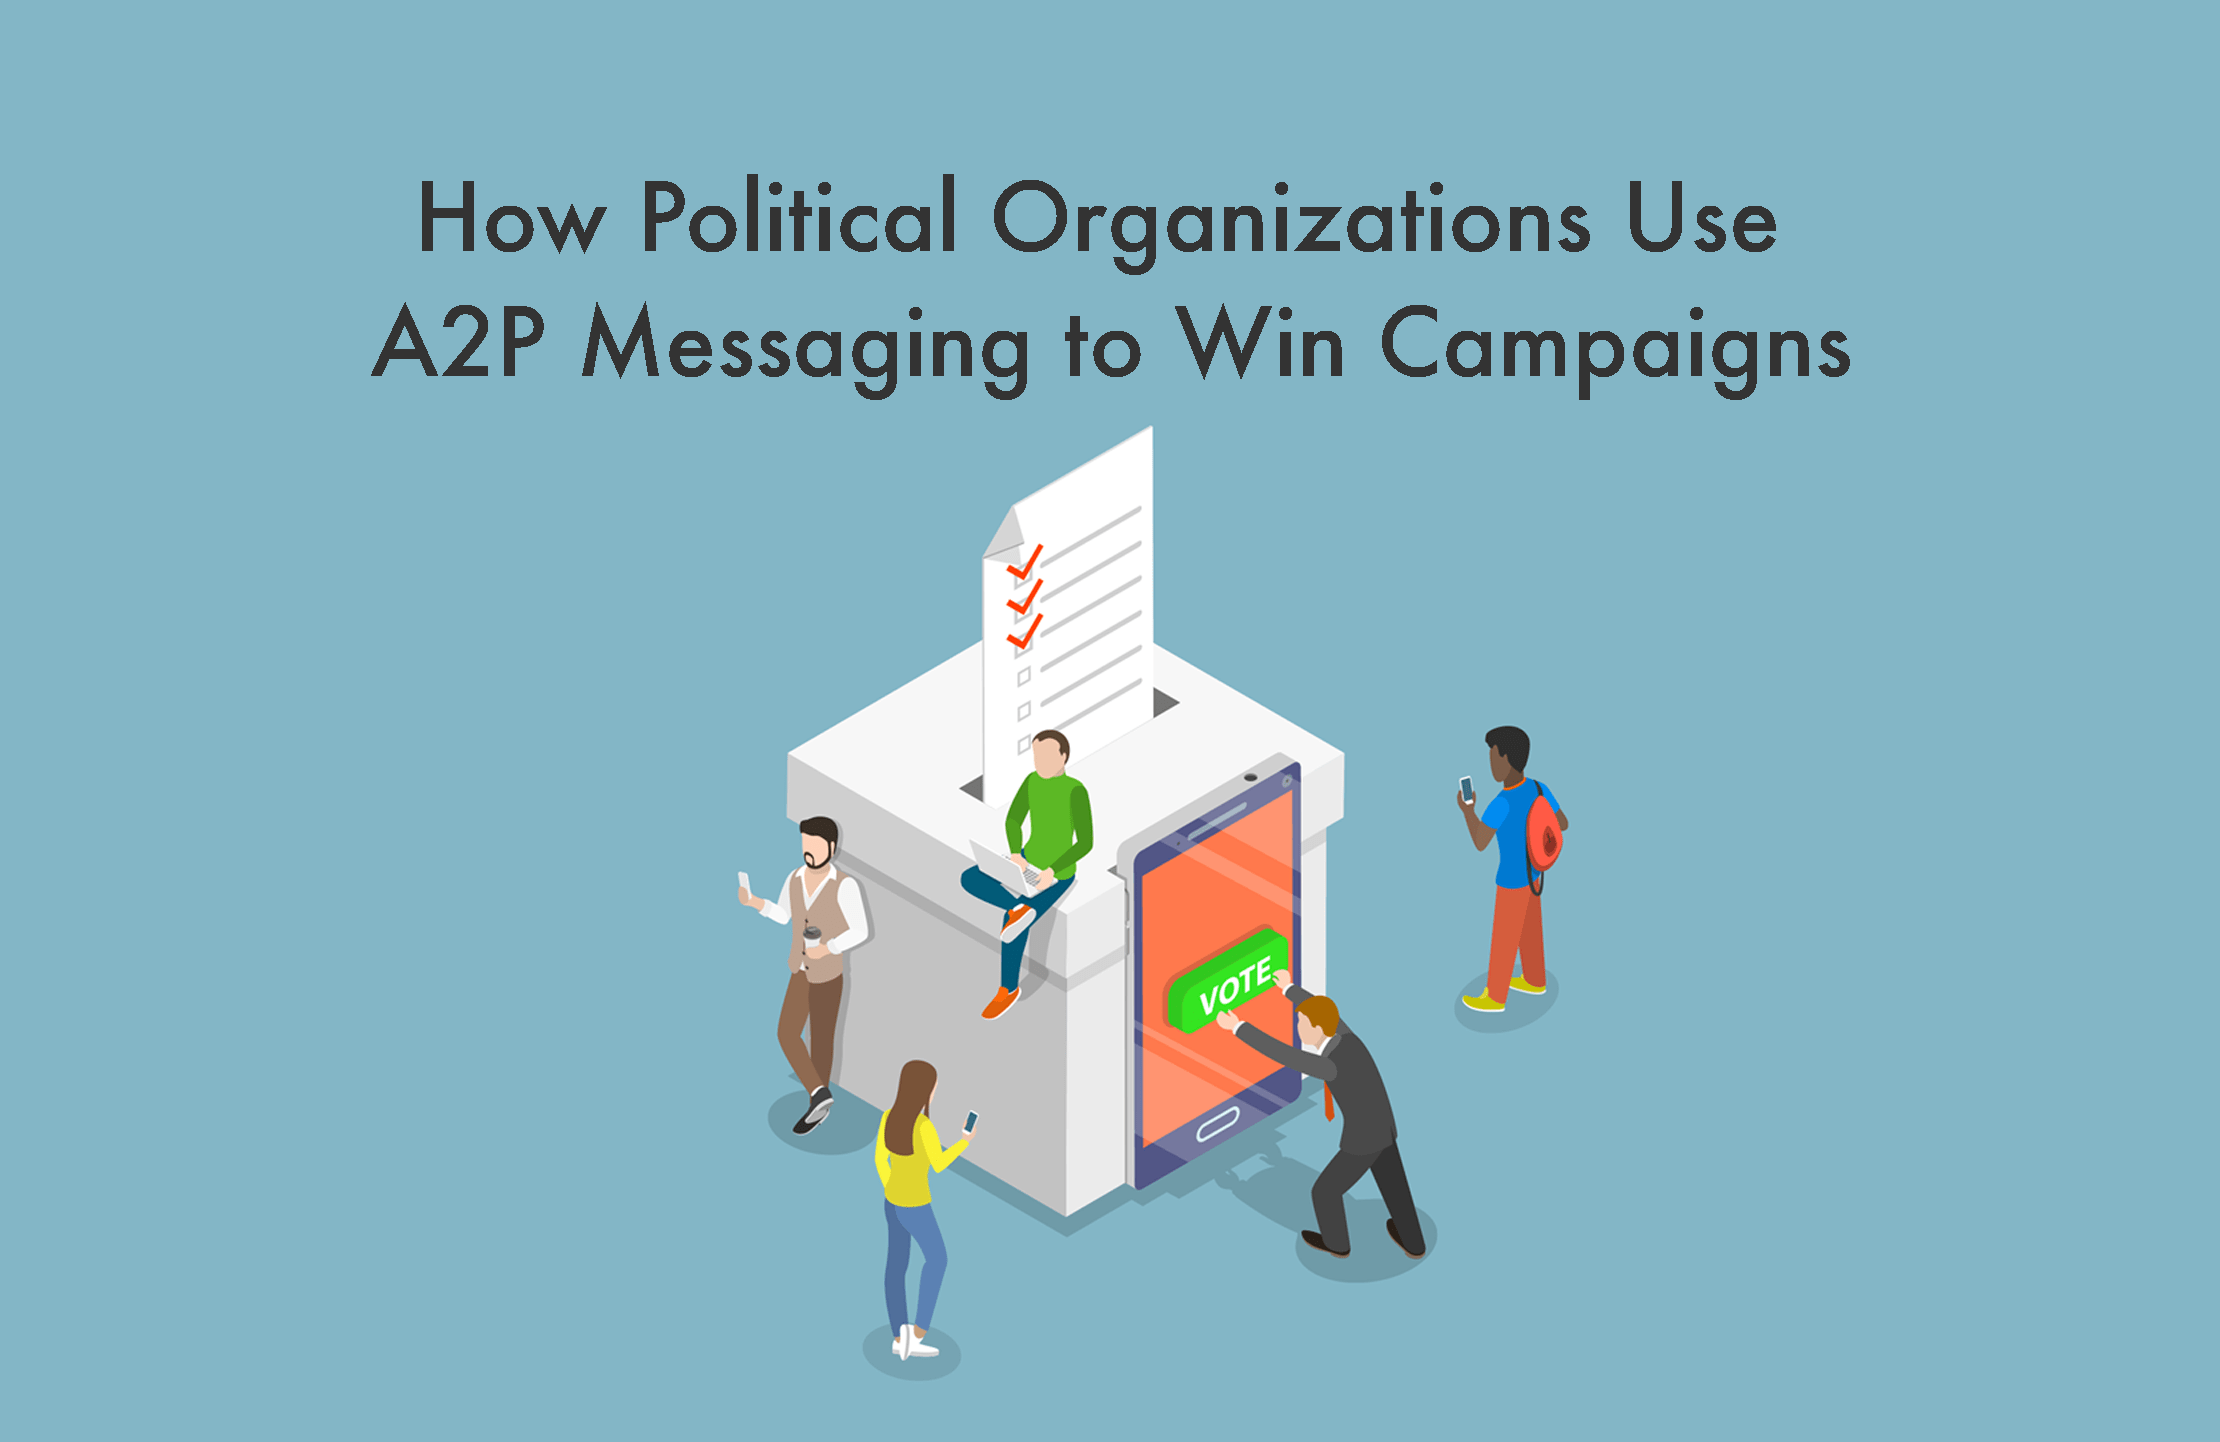 How Political Organizations Use A2P Messaging to Win Campaigns